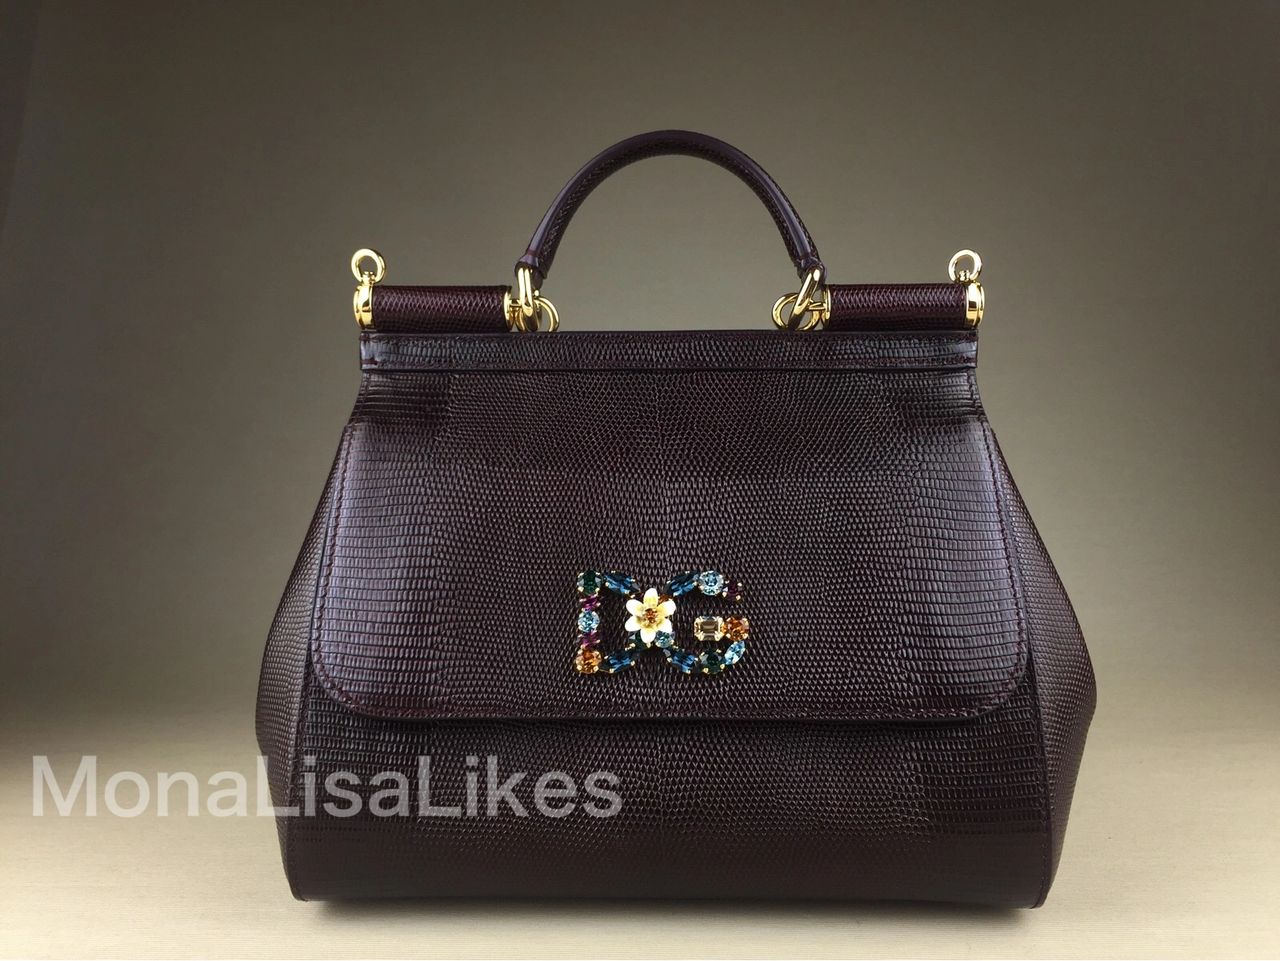 DOLCE & GABBANA Miss Sicily in lizard embossed leather with crystal embellished DG logo